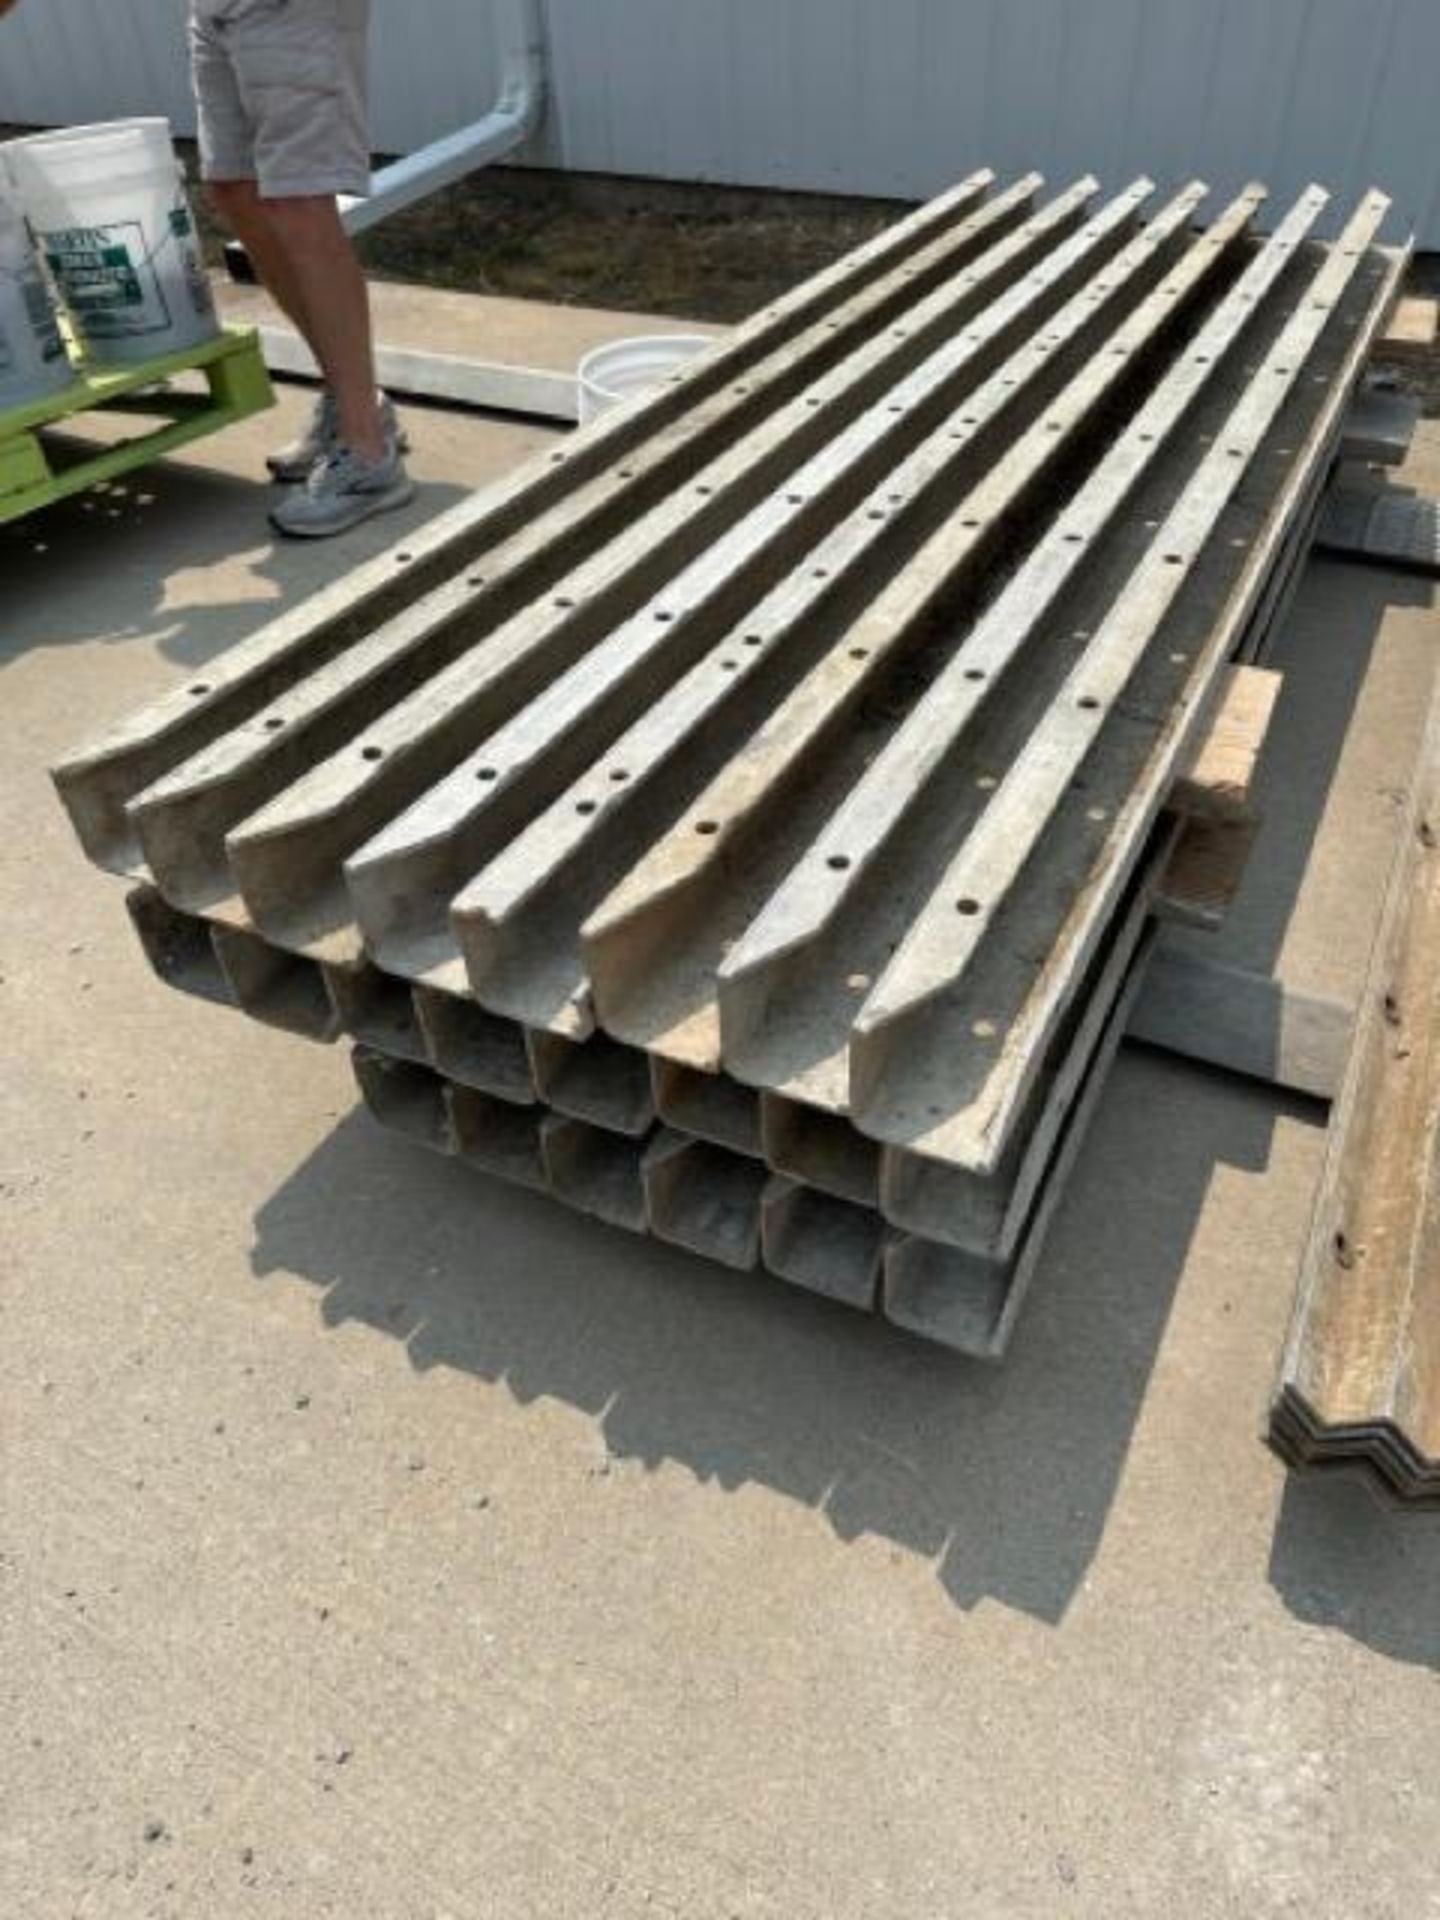 (22) 4" x 4" x 8' ISC Wall-Ties aluminum concrete forms, smooth, 6-12 hole pattern - Image 2 of 3